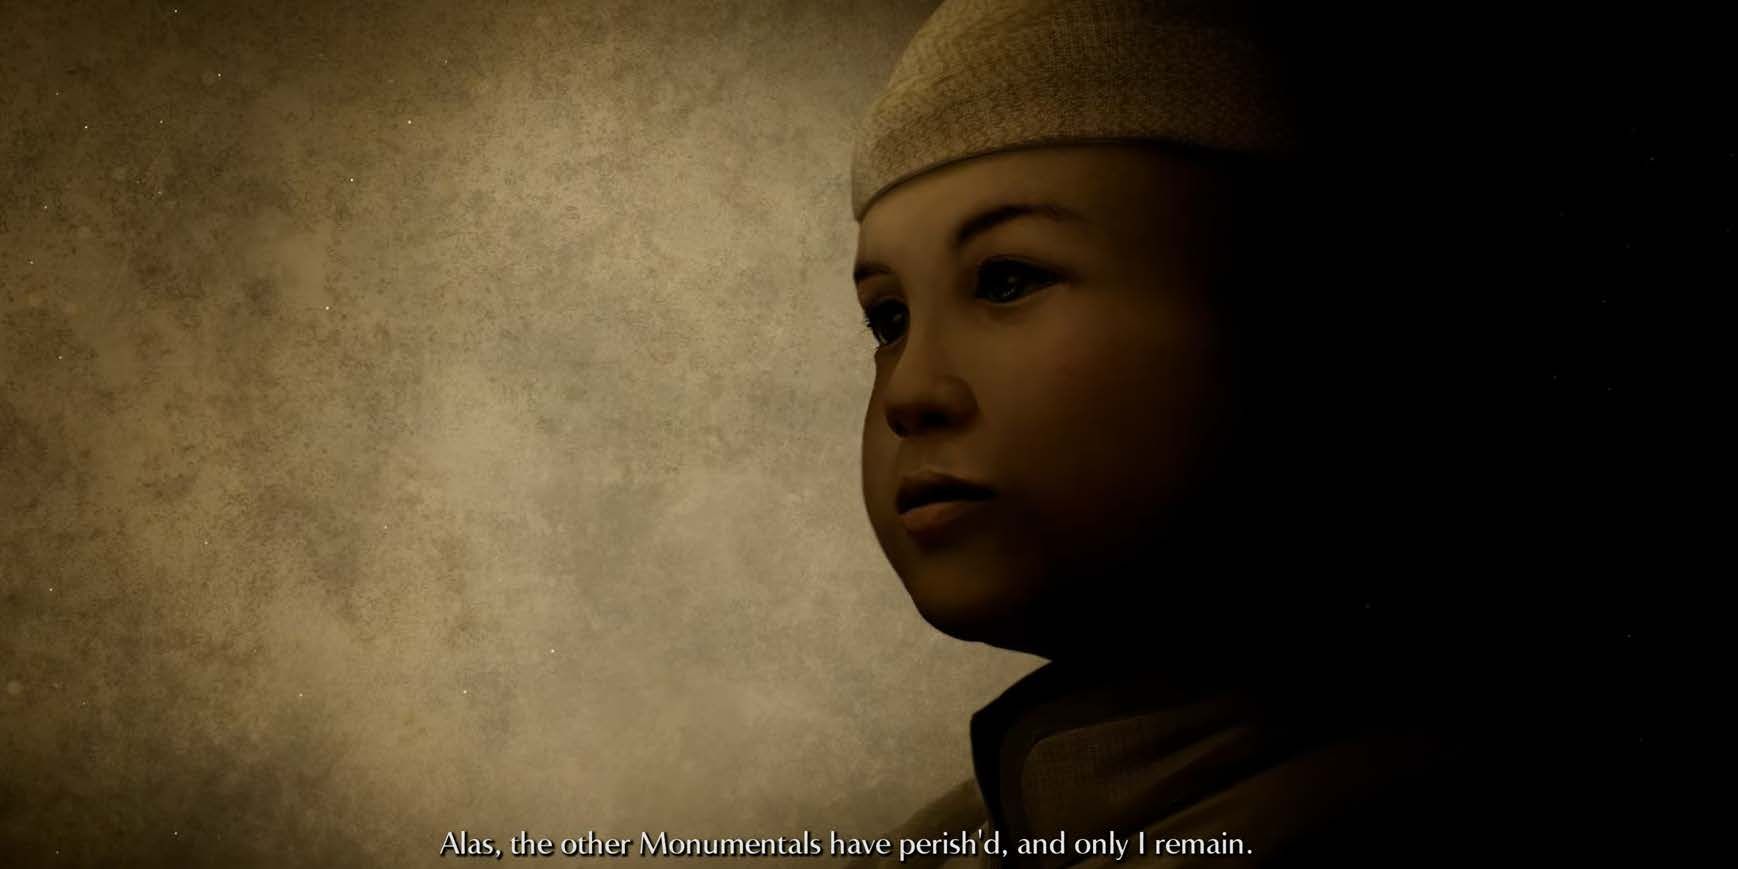 The Last Monumental Explaining the Plight of Their Race to the Player